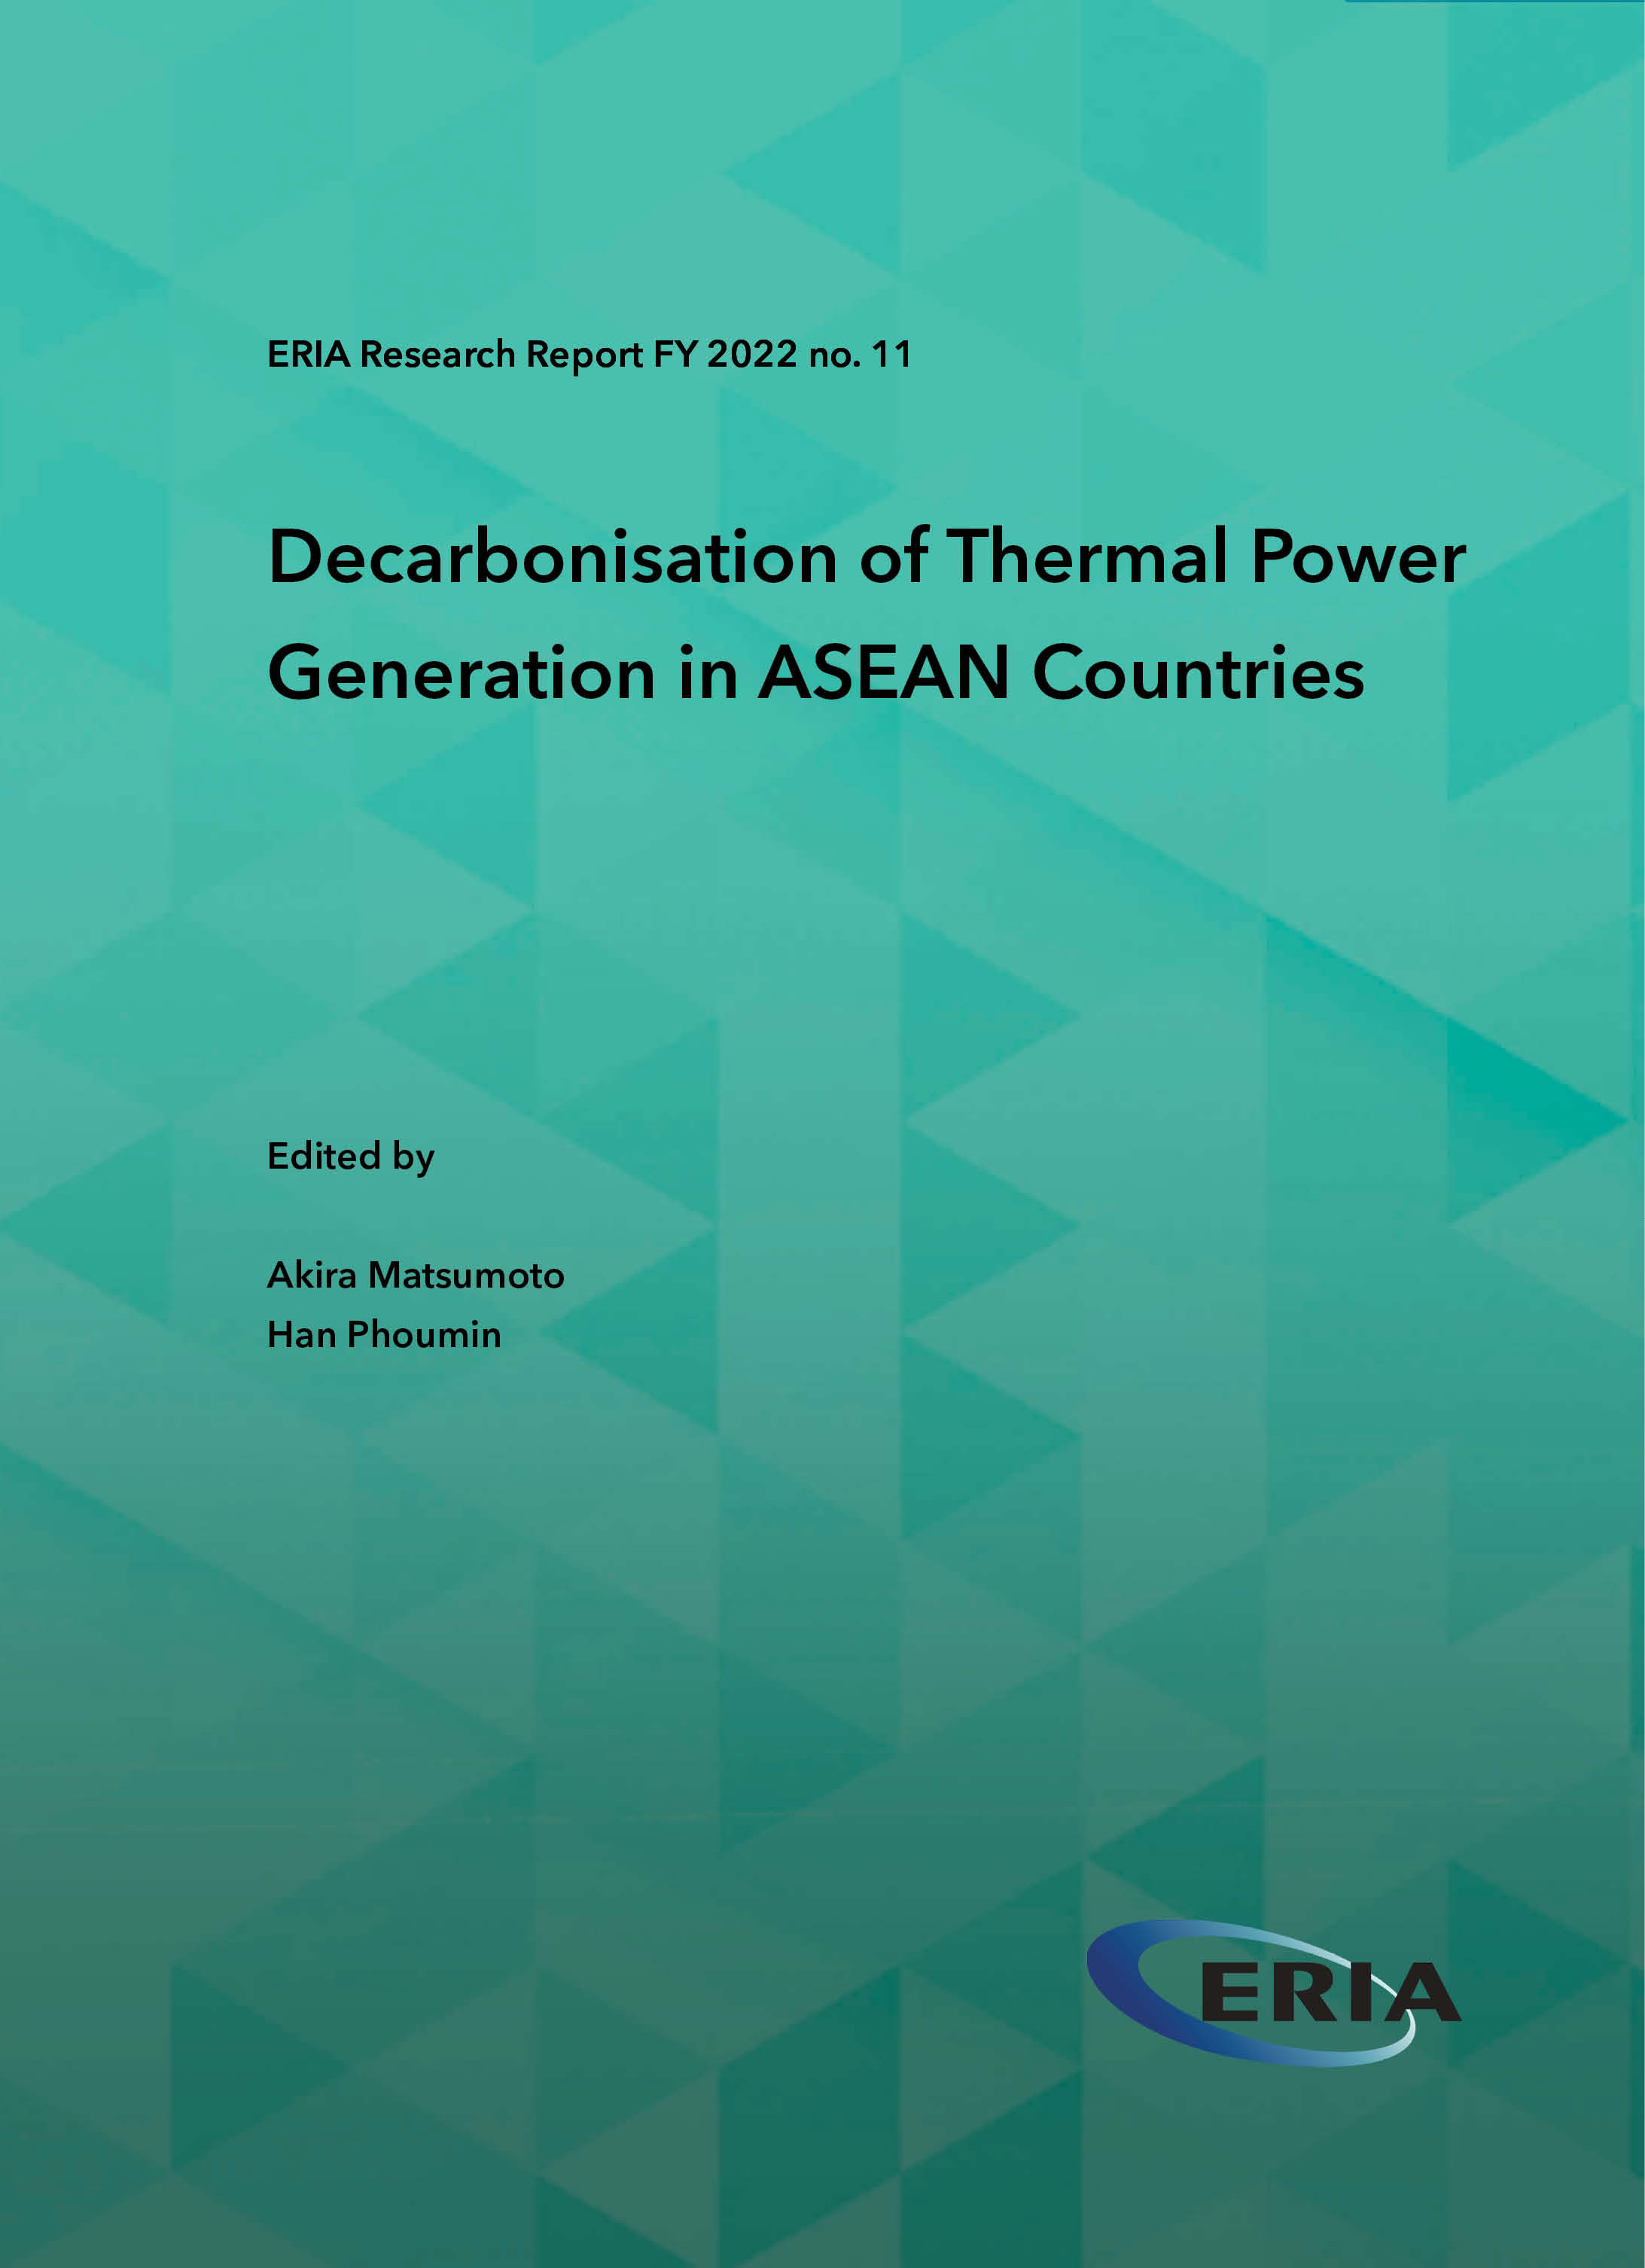 Decarbonisation of Thermal Power Generation in ASEAN Countries